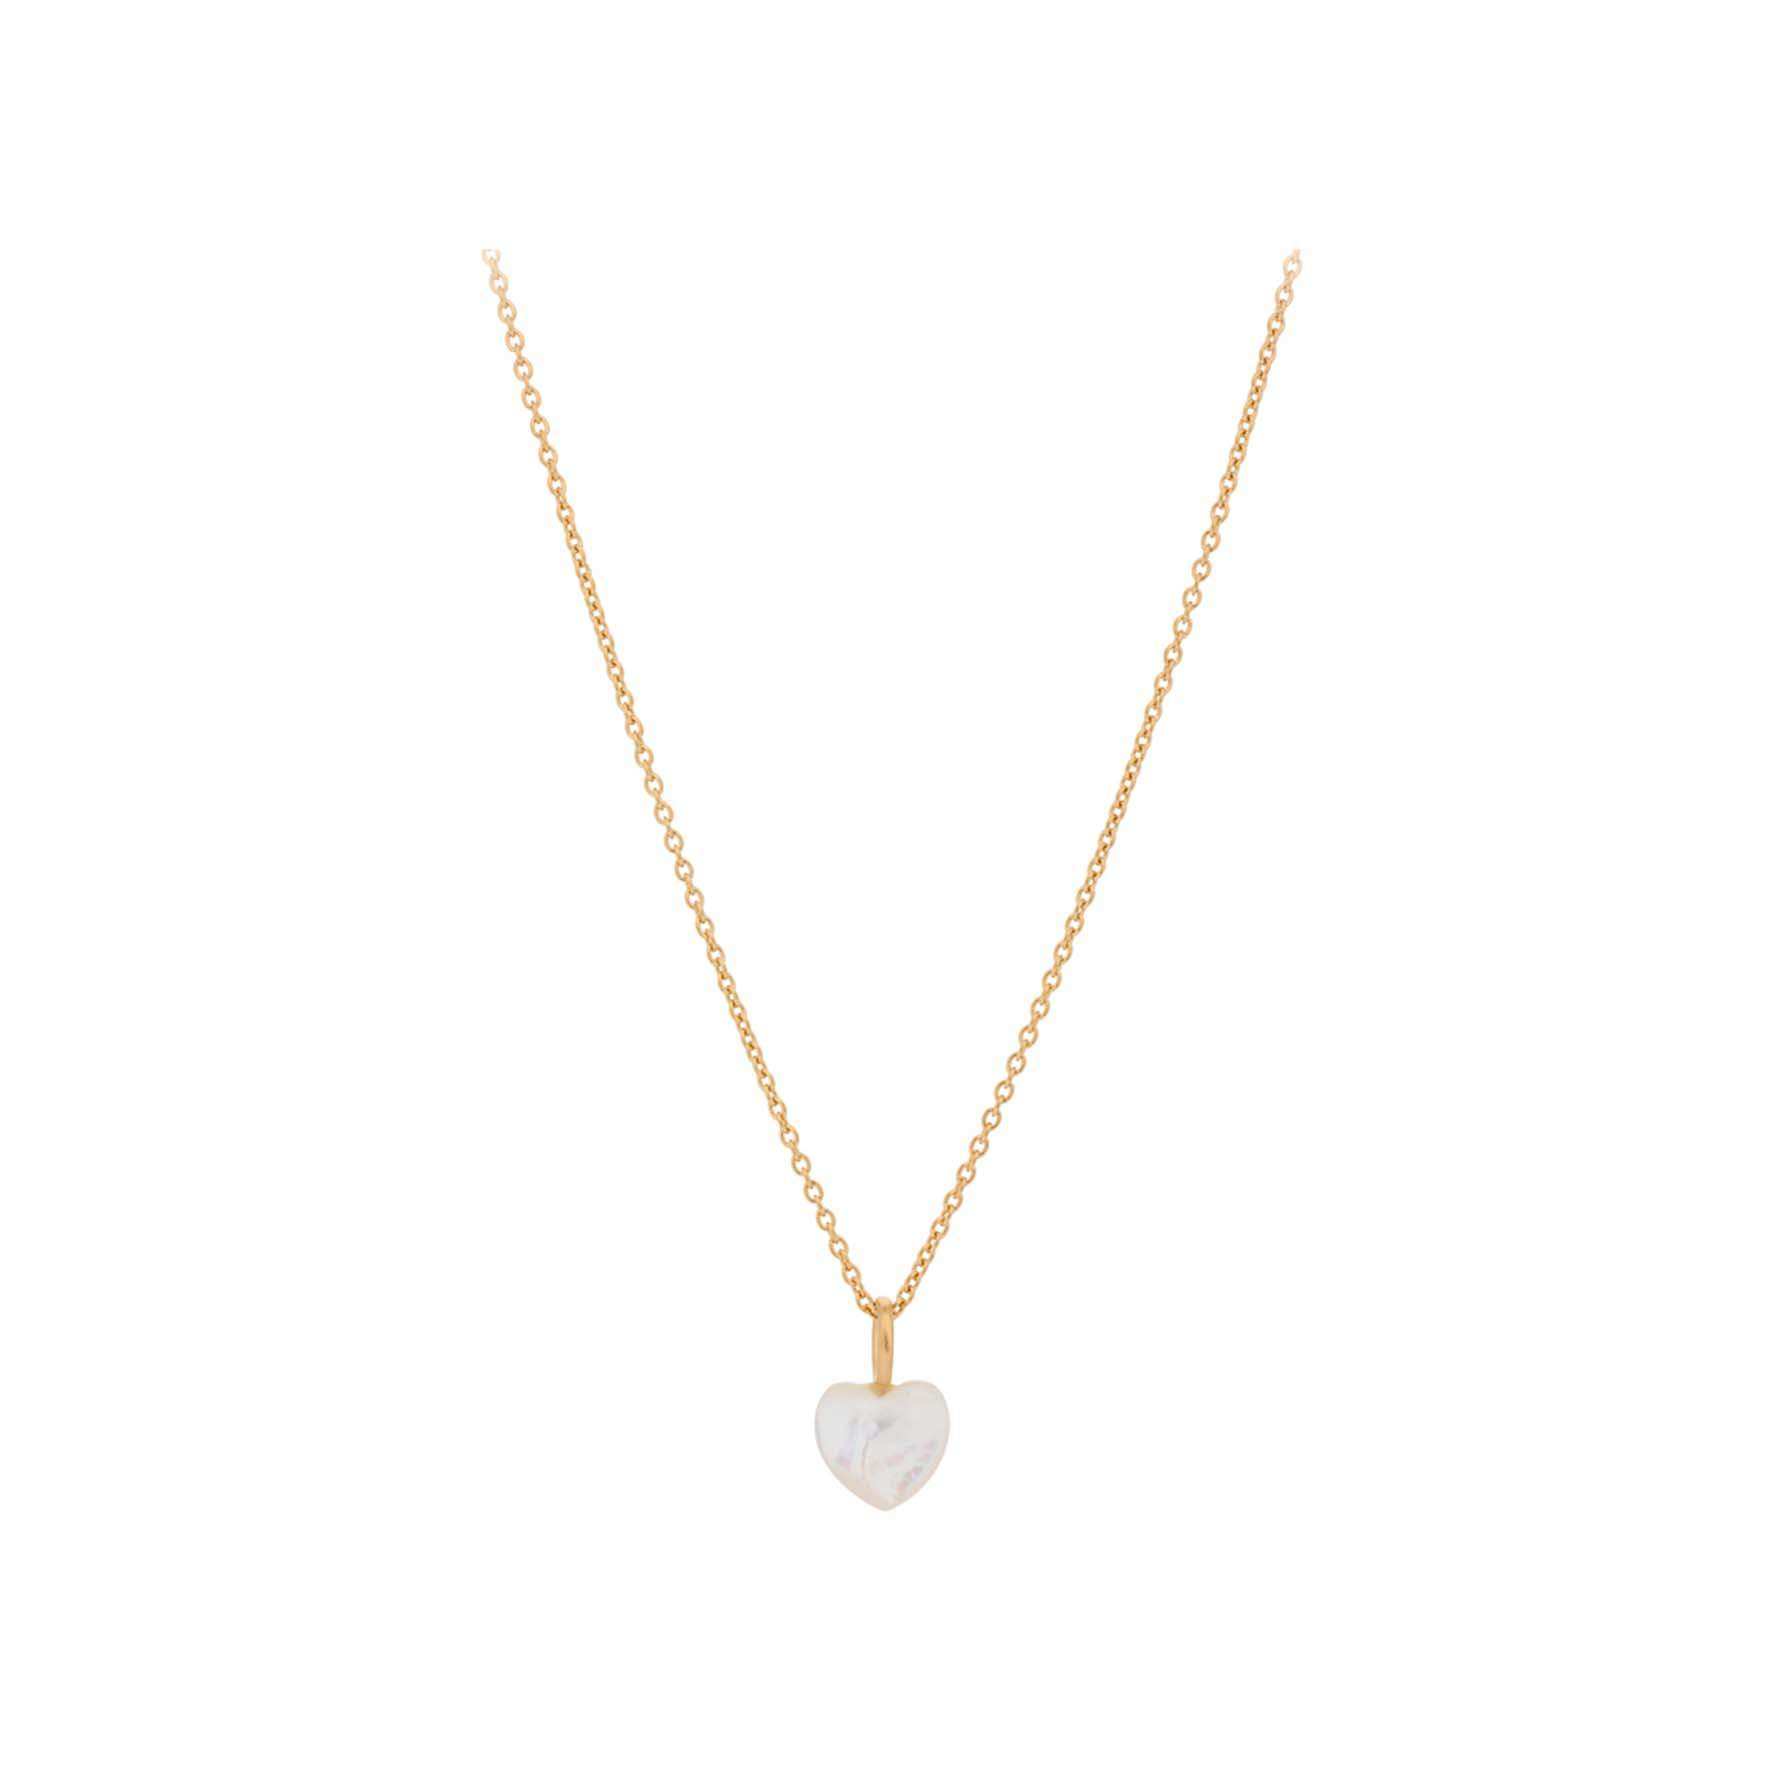 Ocean Heart Necklace from Pernille Corydon in Goldplated-Silver Sterling 925